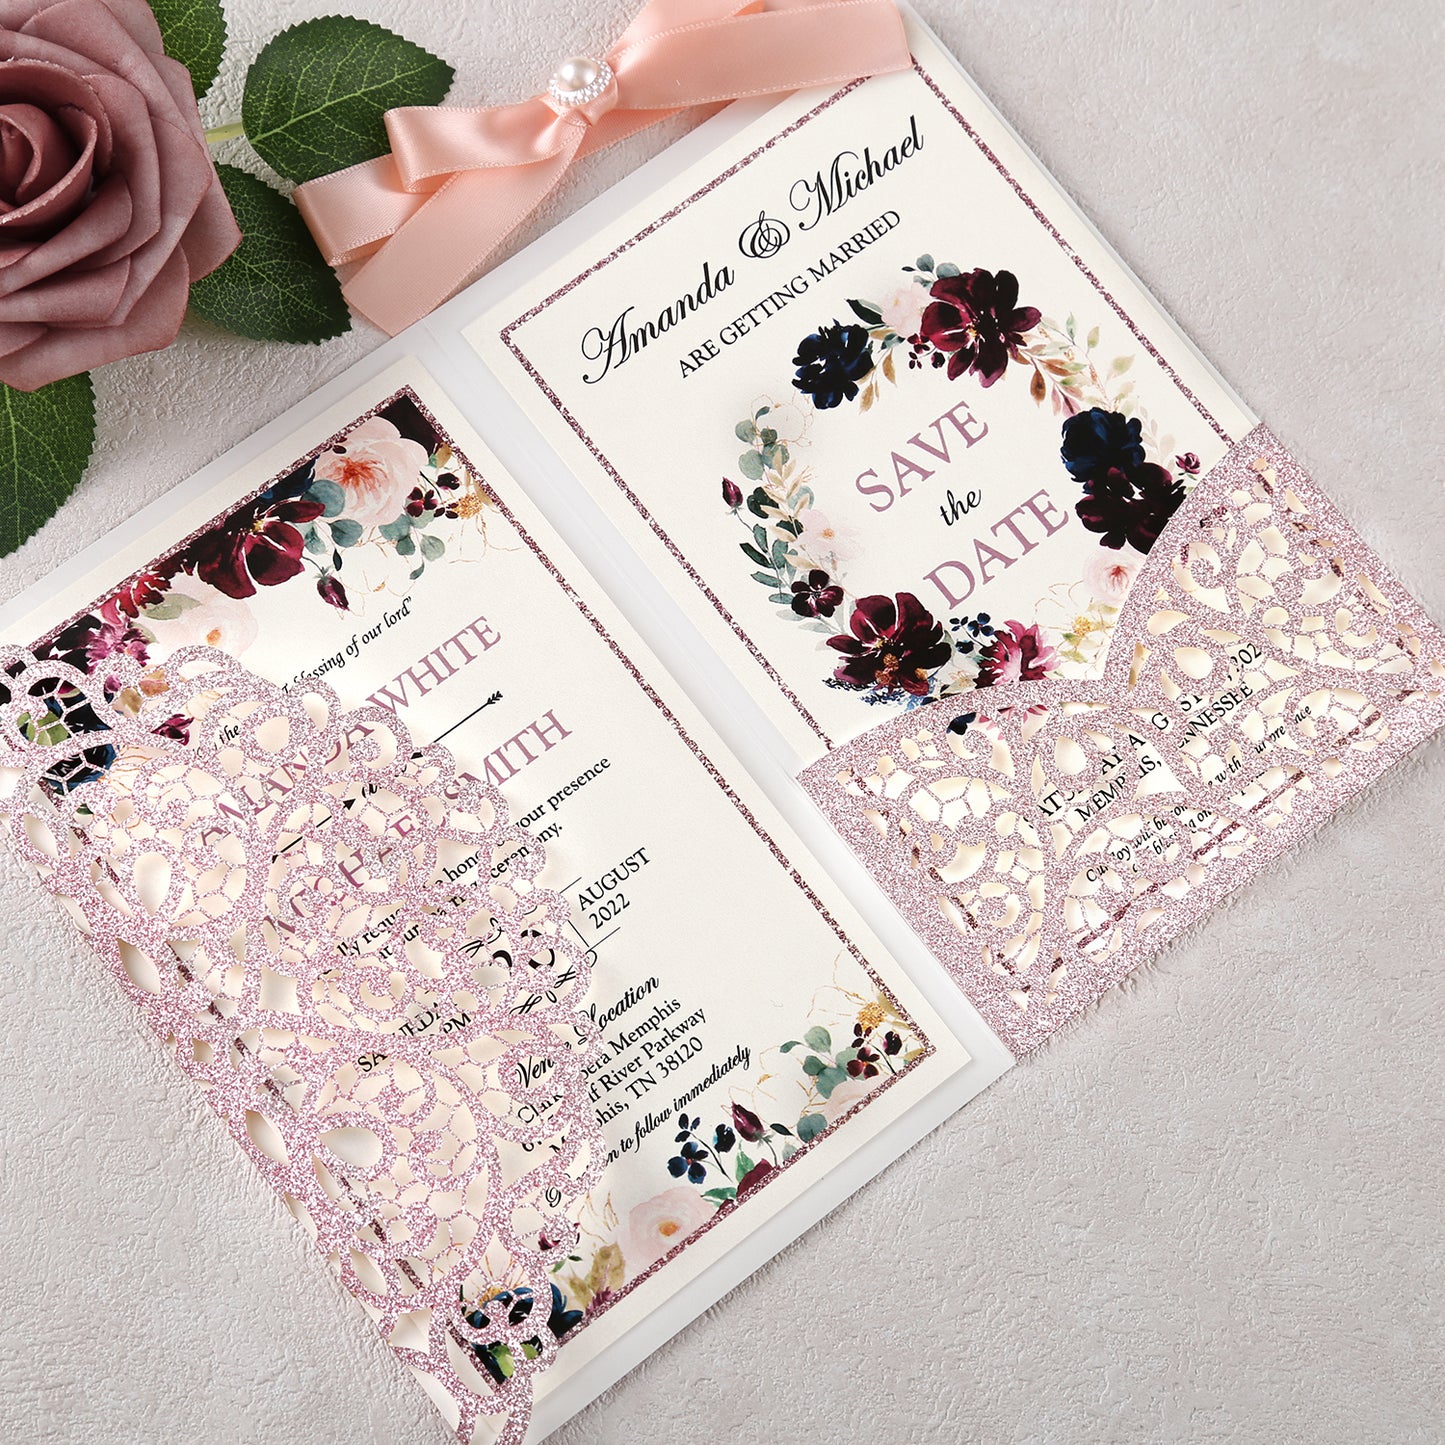 4.7 x7 inch Rose Gold Glitter Laser Cut Hollow Rose Wedding Invitations Cards with Envelopes for Wedding Party